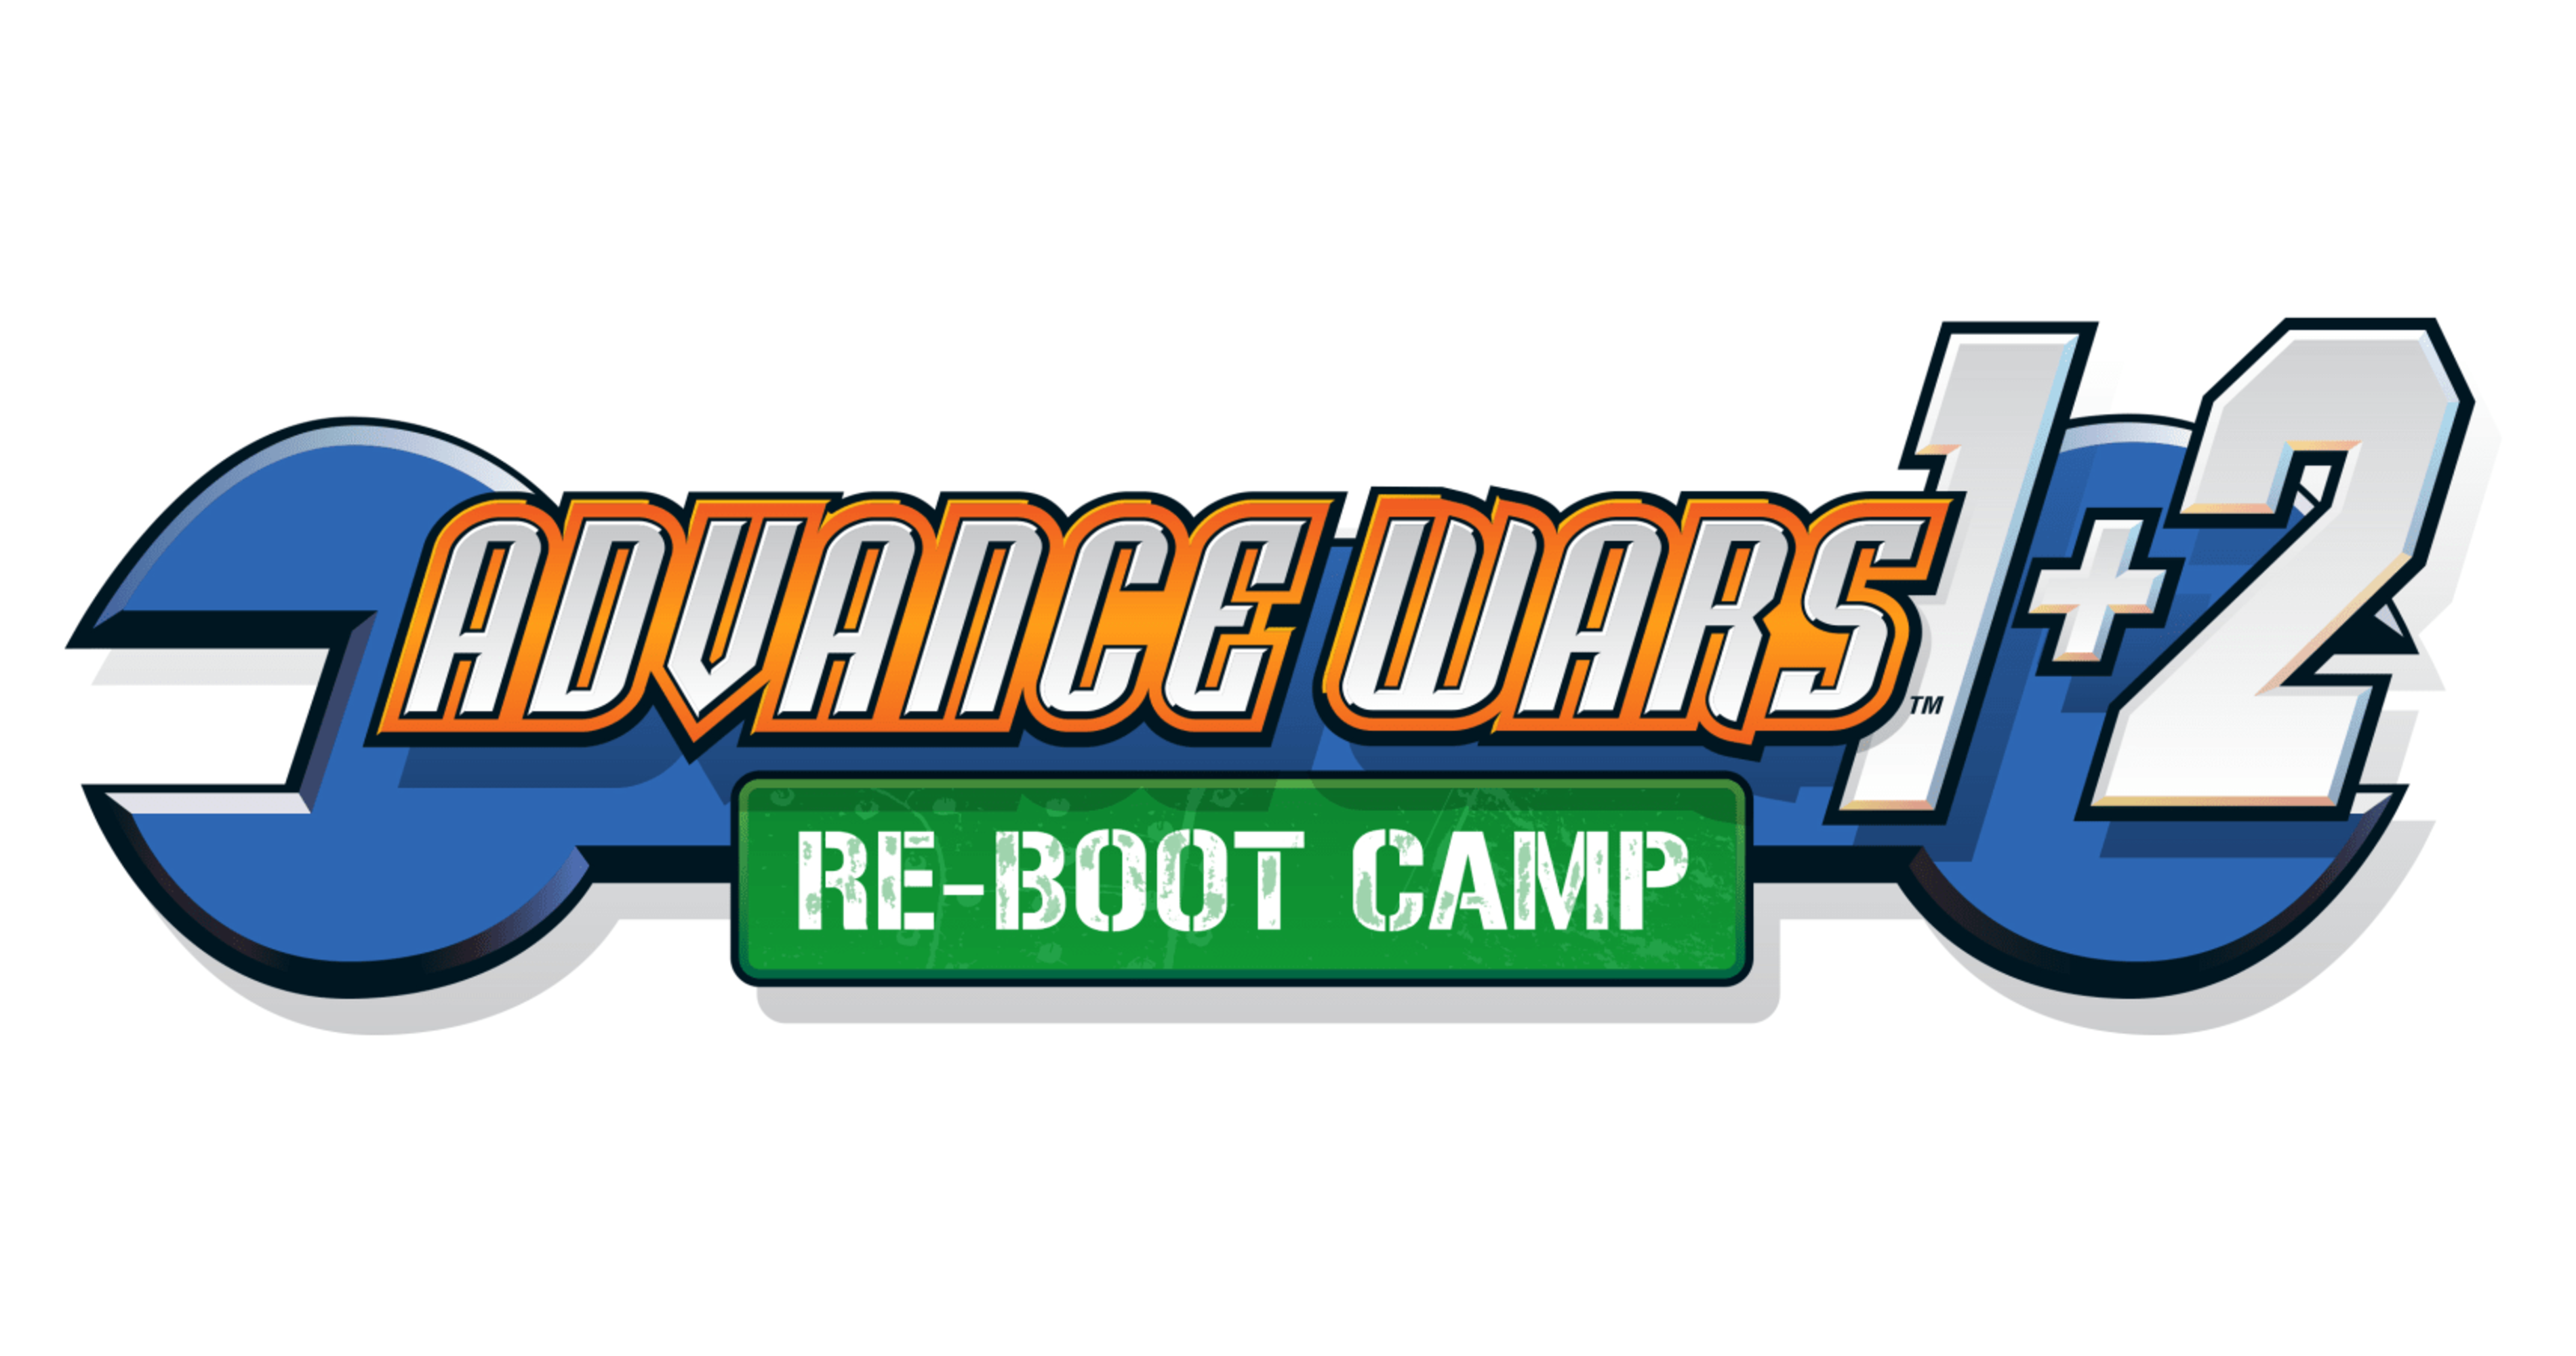 Advance Wars 1+2: Re-Boot Camp (Switch) • Prices »